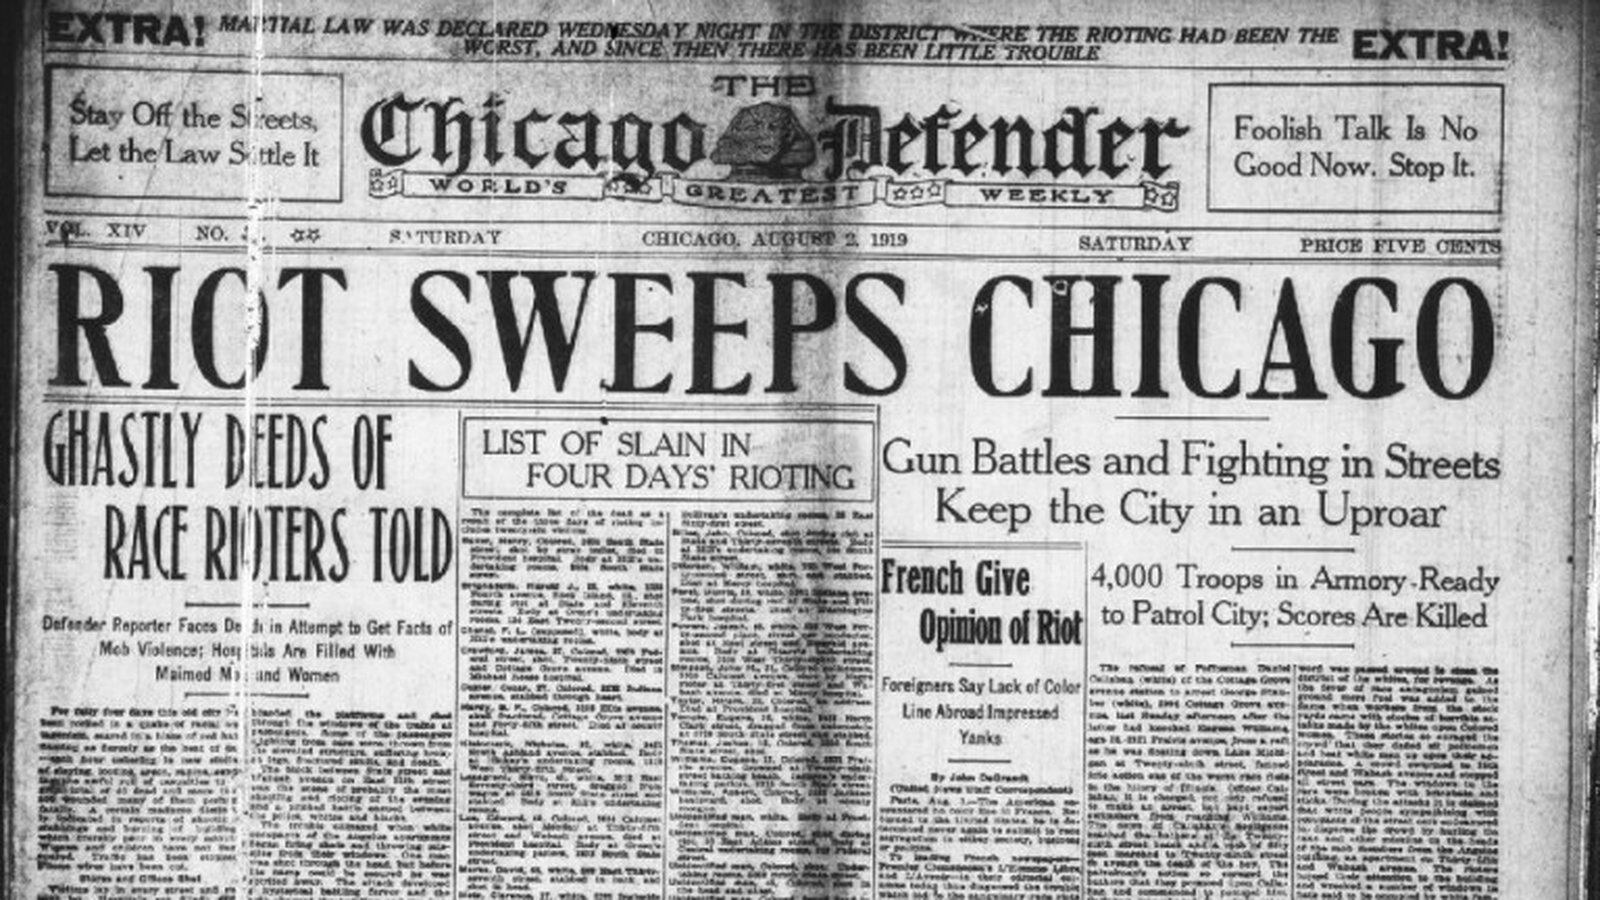 The front page of the Chicago Defender on August 2, 1919. Race riots broke out across the city for seven days.